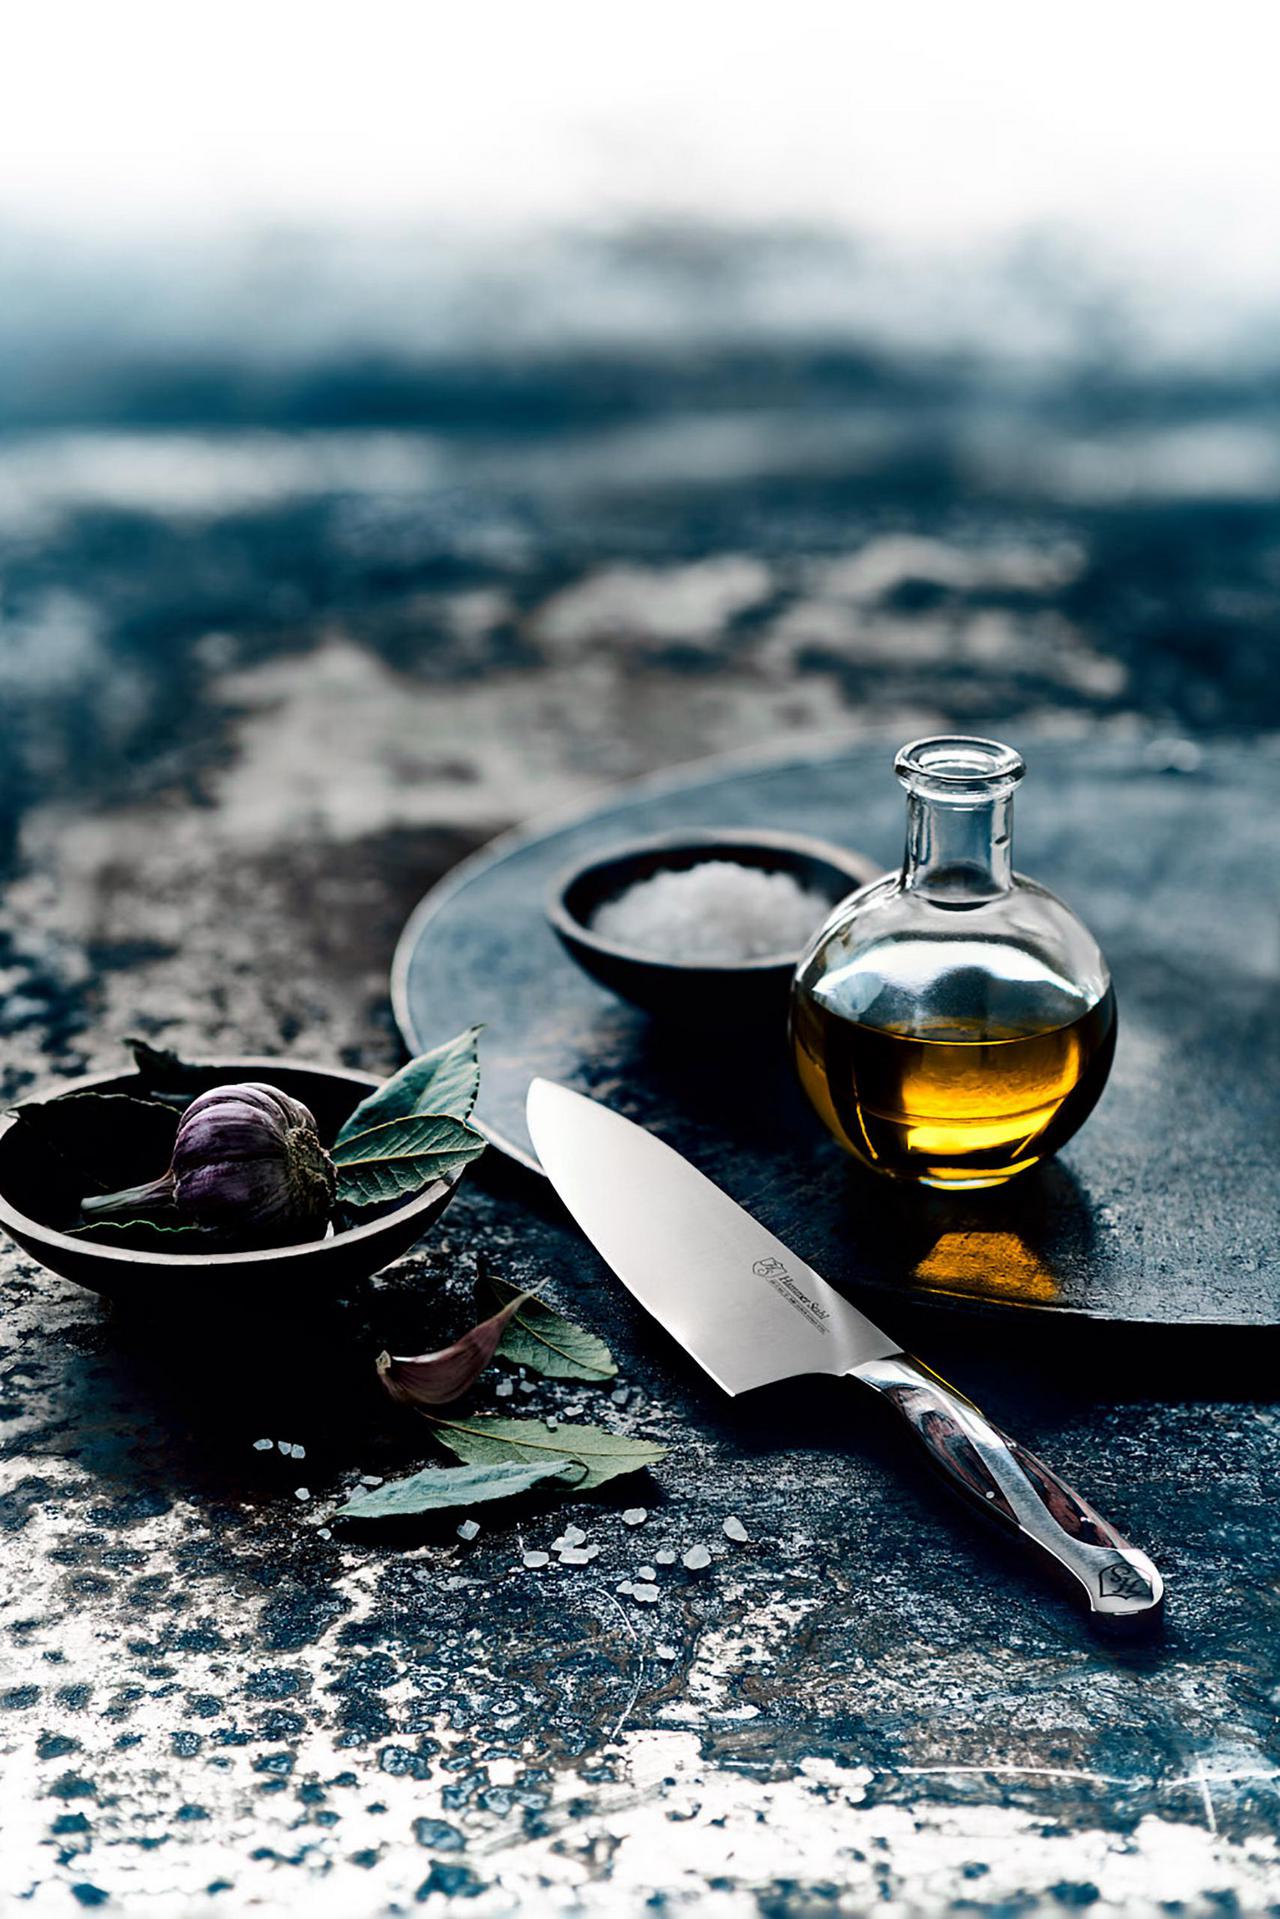 Food photography with a knife